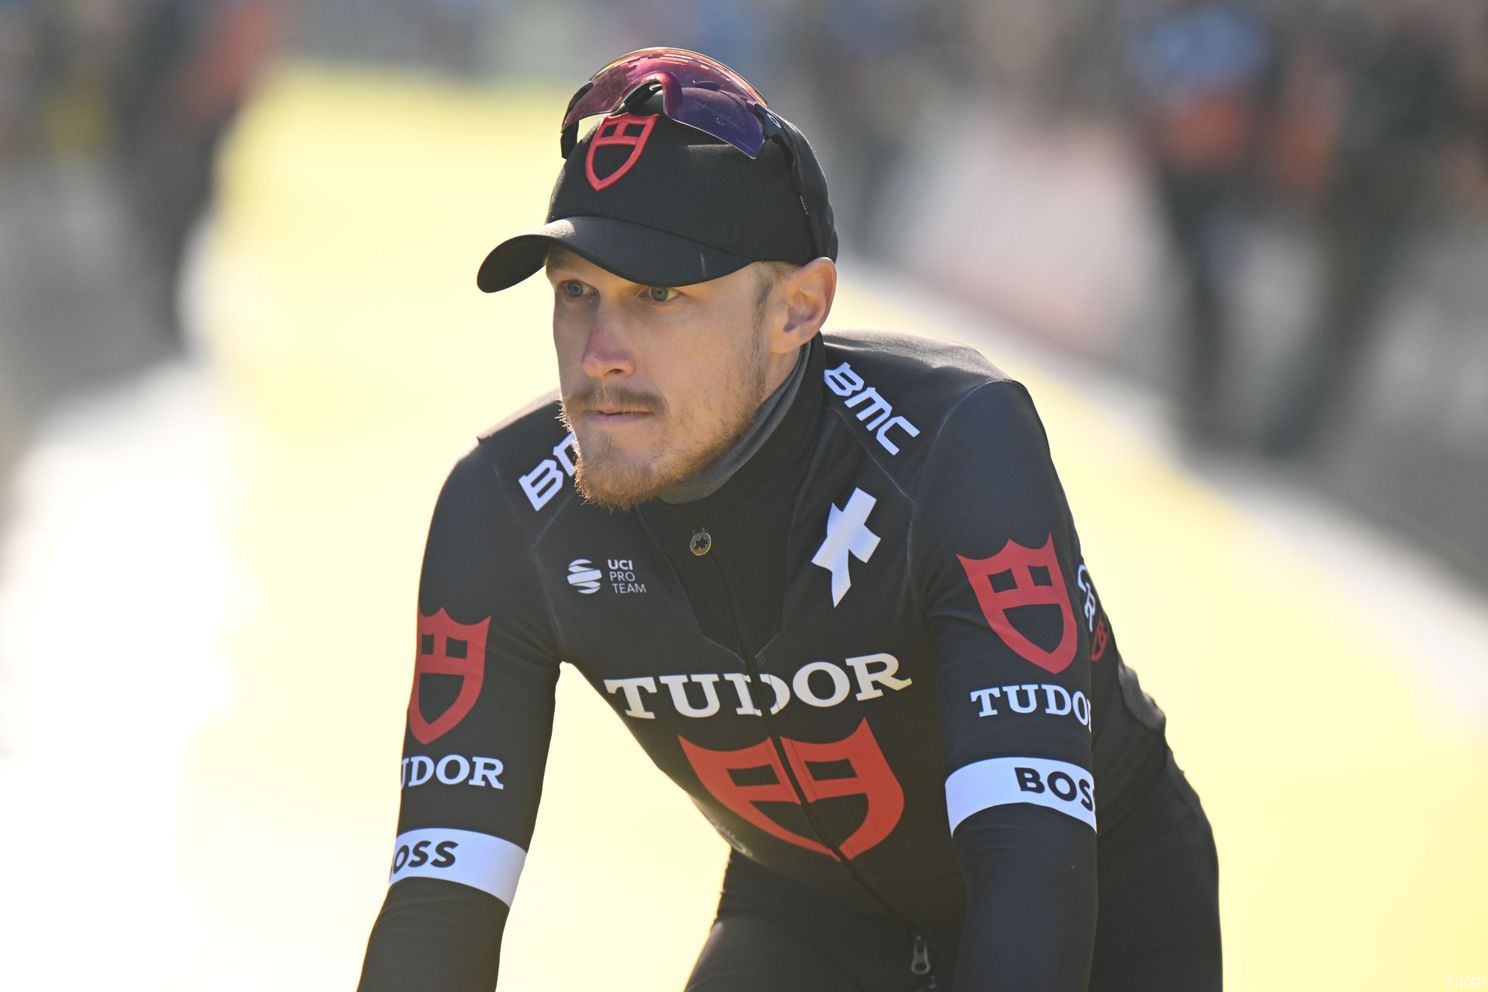 Tudor Project Cancellara further solidifies towards Giro: "lots of compliments within the peloton" from Van Aert and co